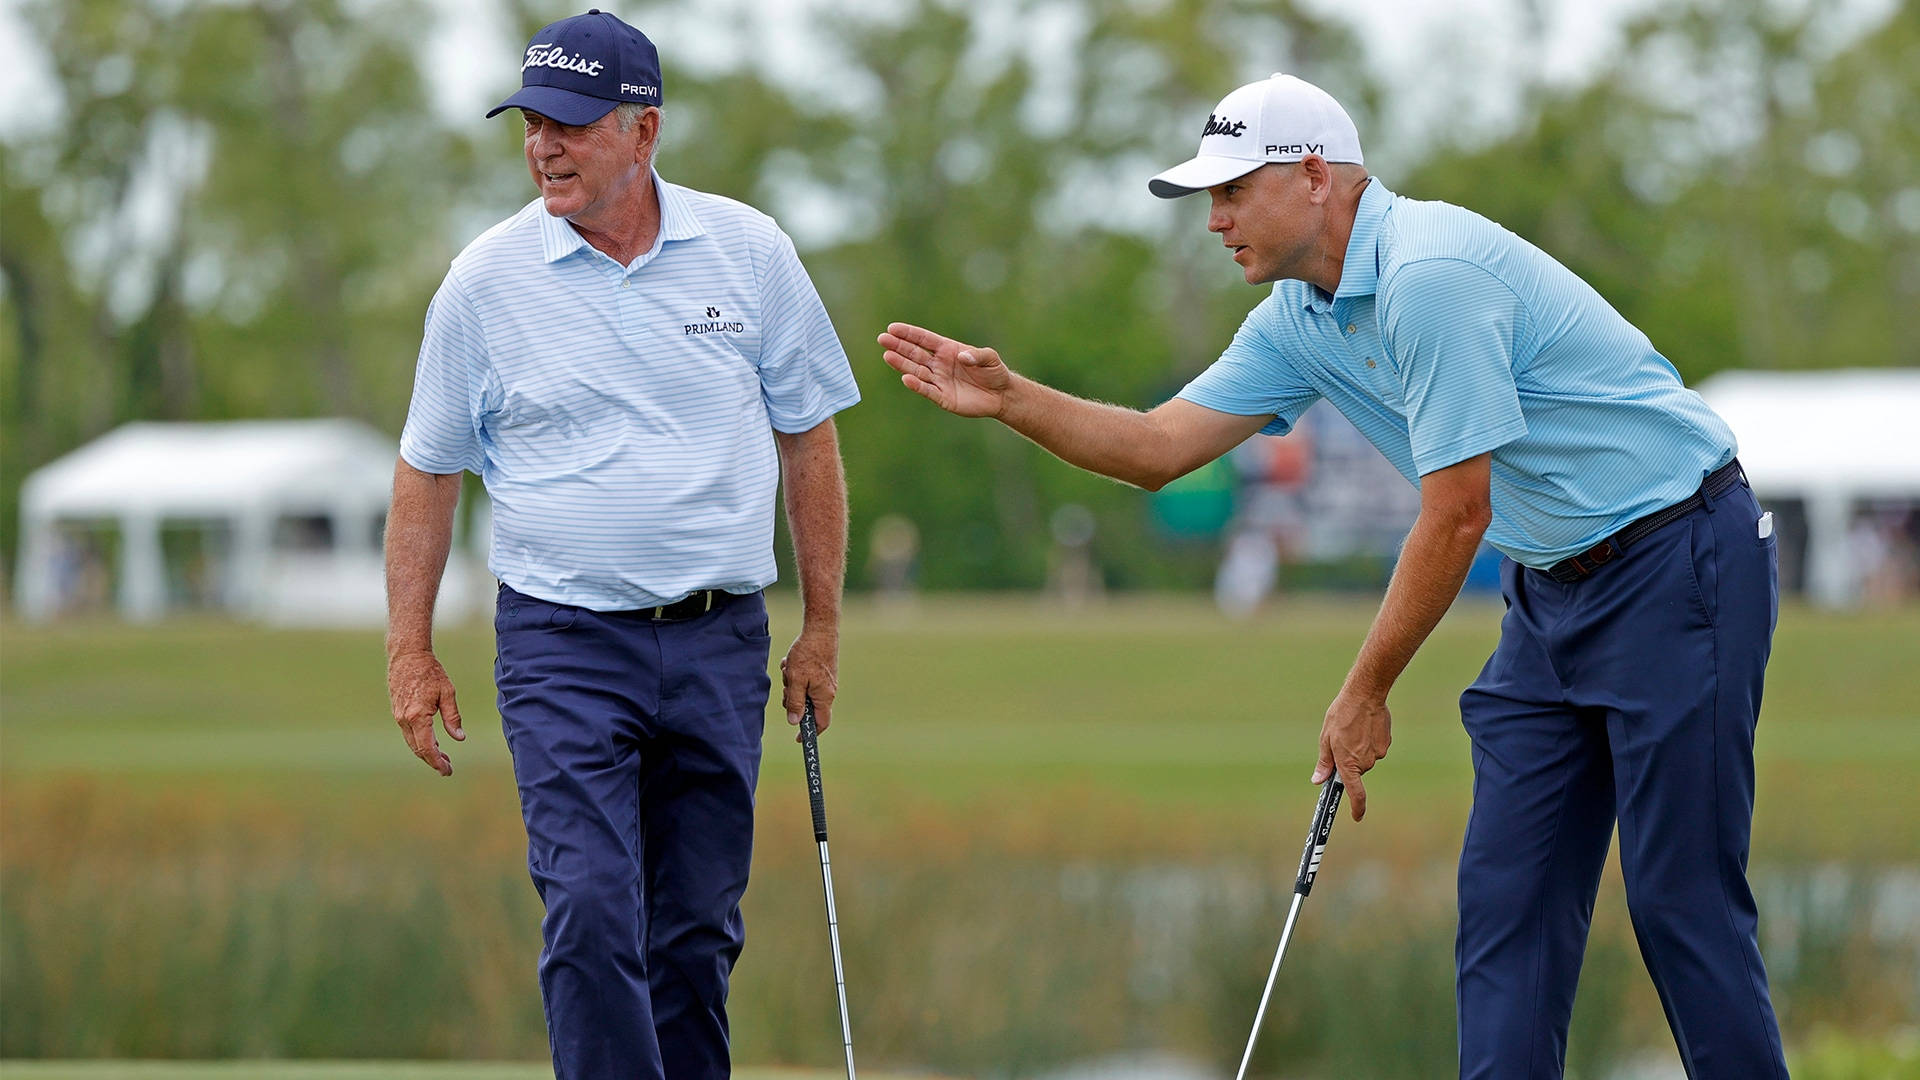 Bill Haas alongside his father, Jay Haas, in a warm and memorable moment Wallpaper